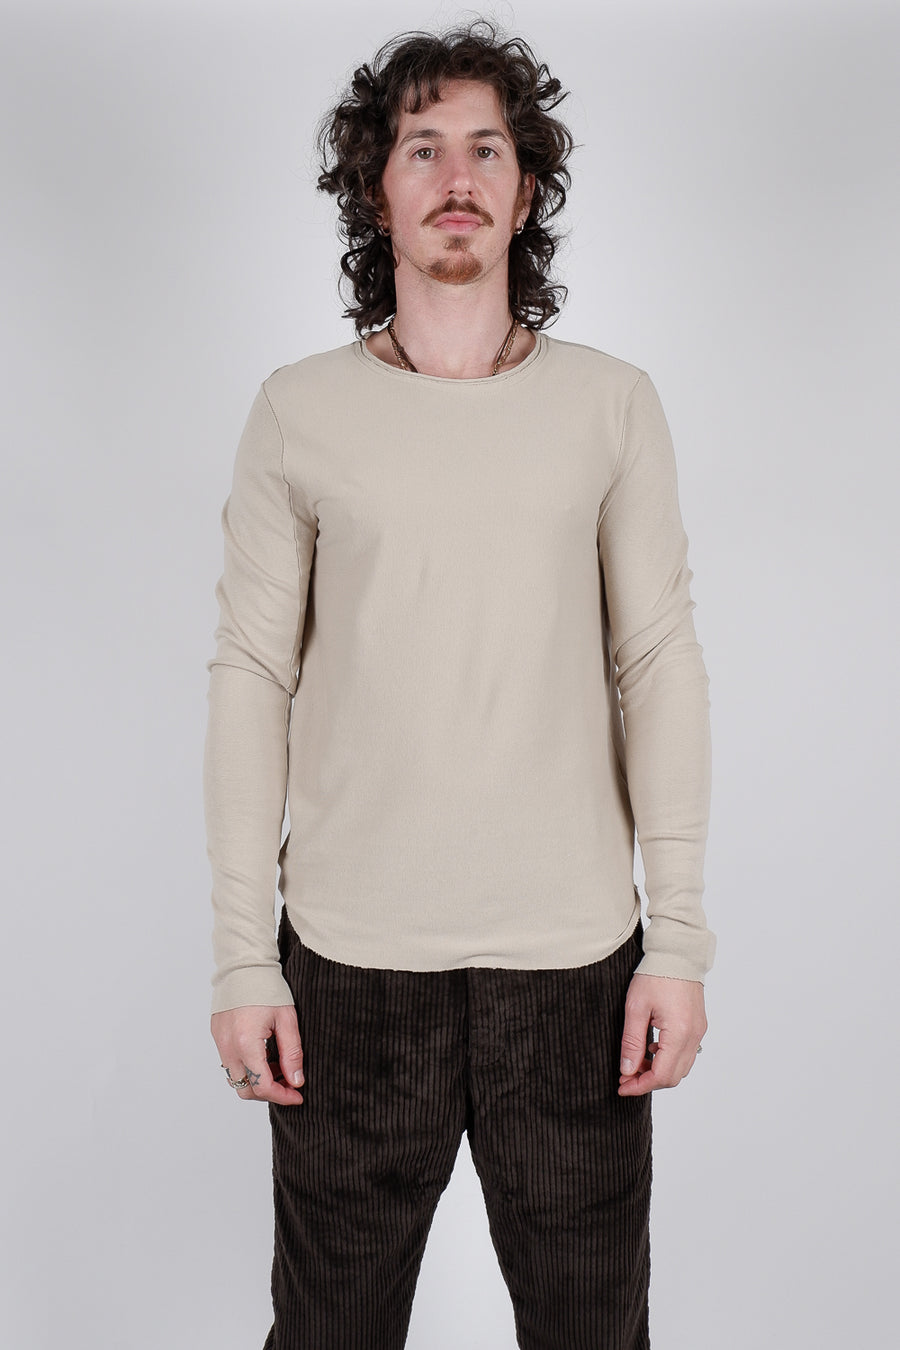 Buy the Hannes Roether Raw Neck Cotton L/S T-Shirt in Sand at Intro. Spend £50 for free UK delivery. Official stockists. We ship worldwide.